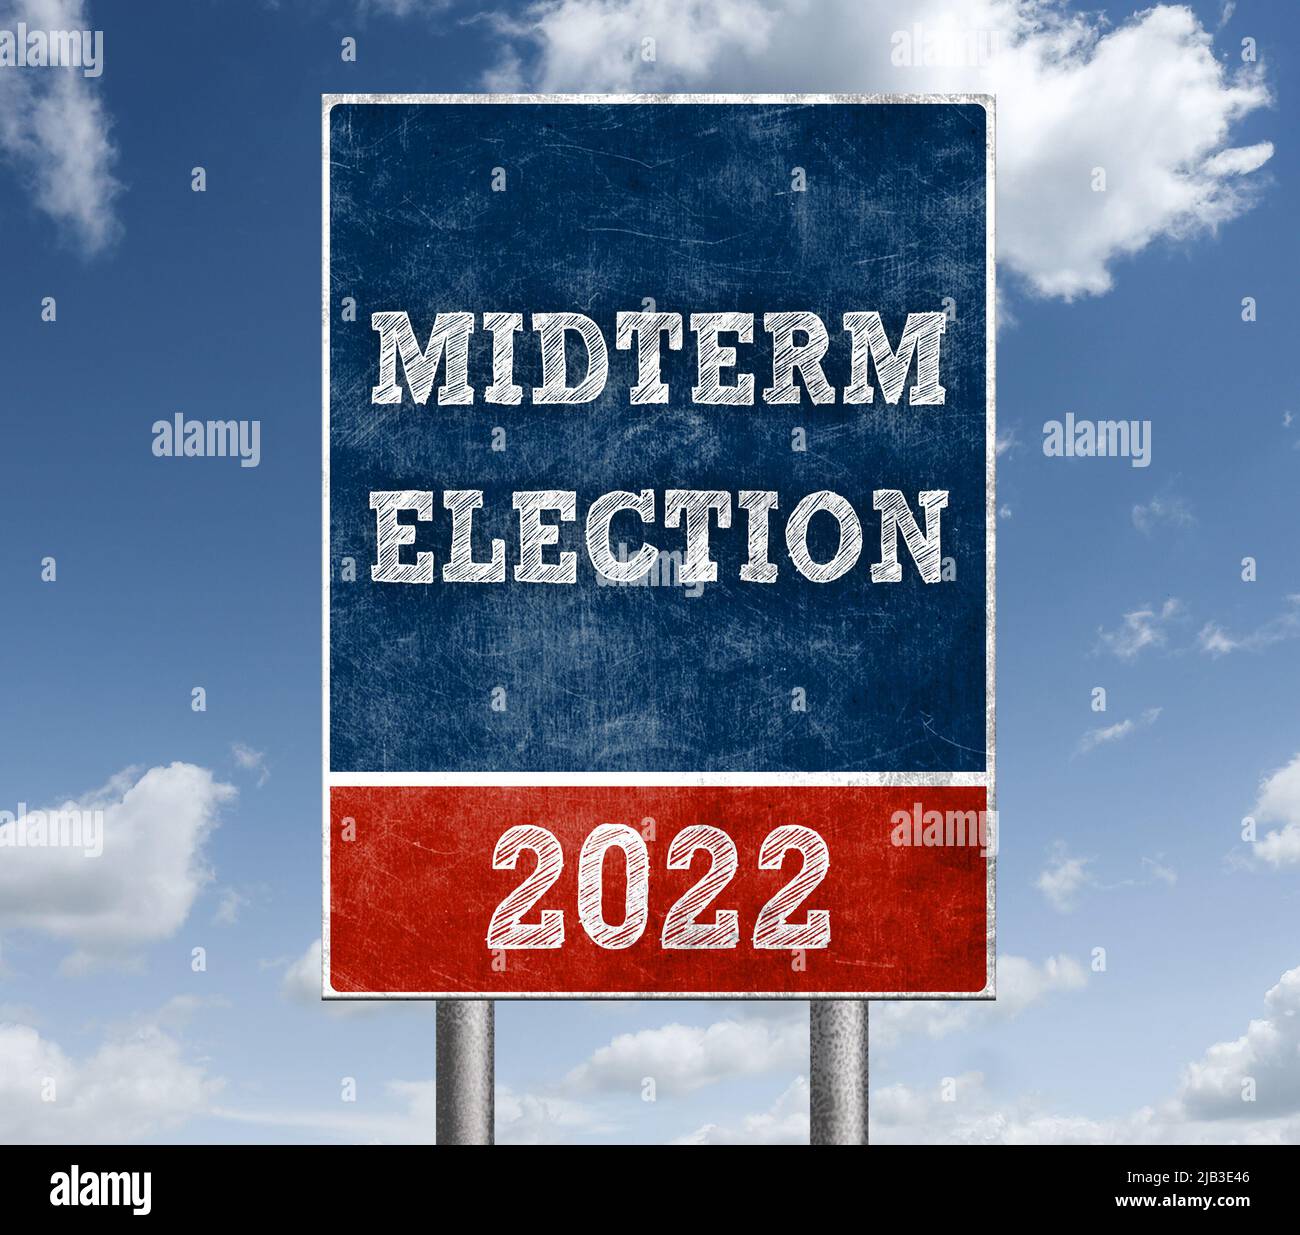 Road sign - Midterm Election in 2022 Stock Photo